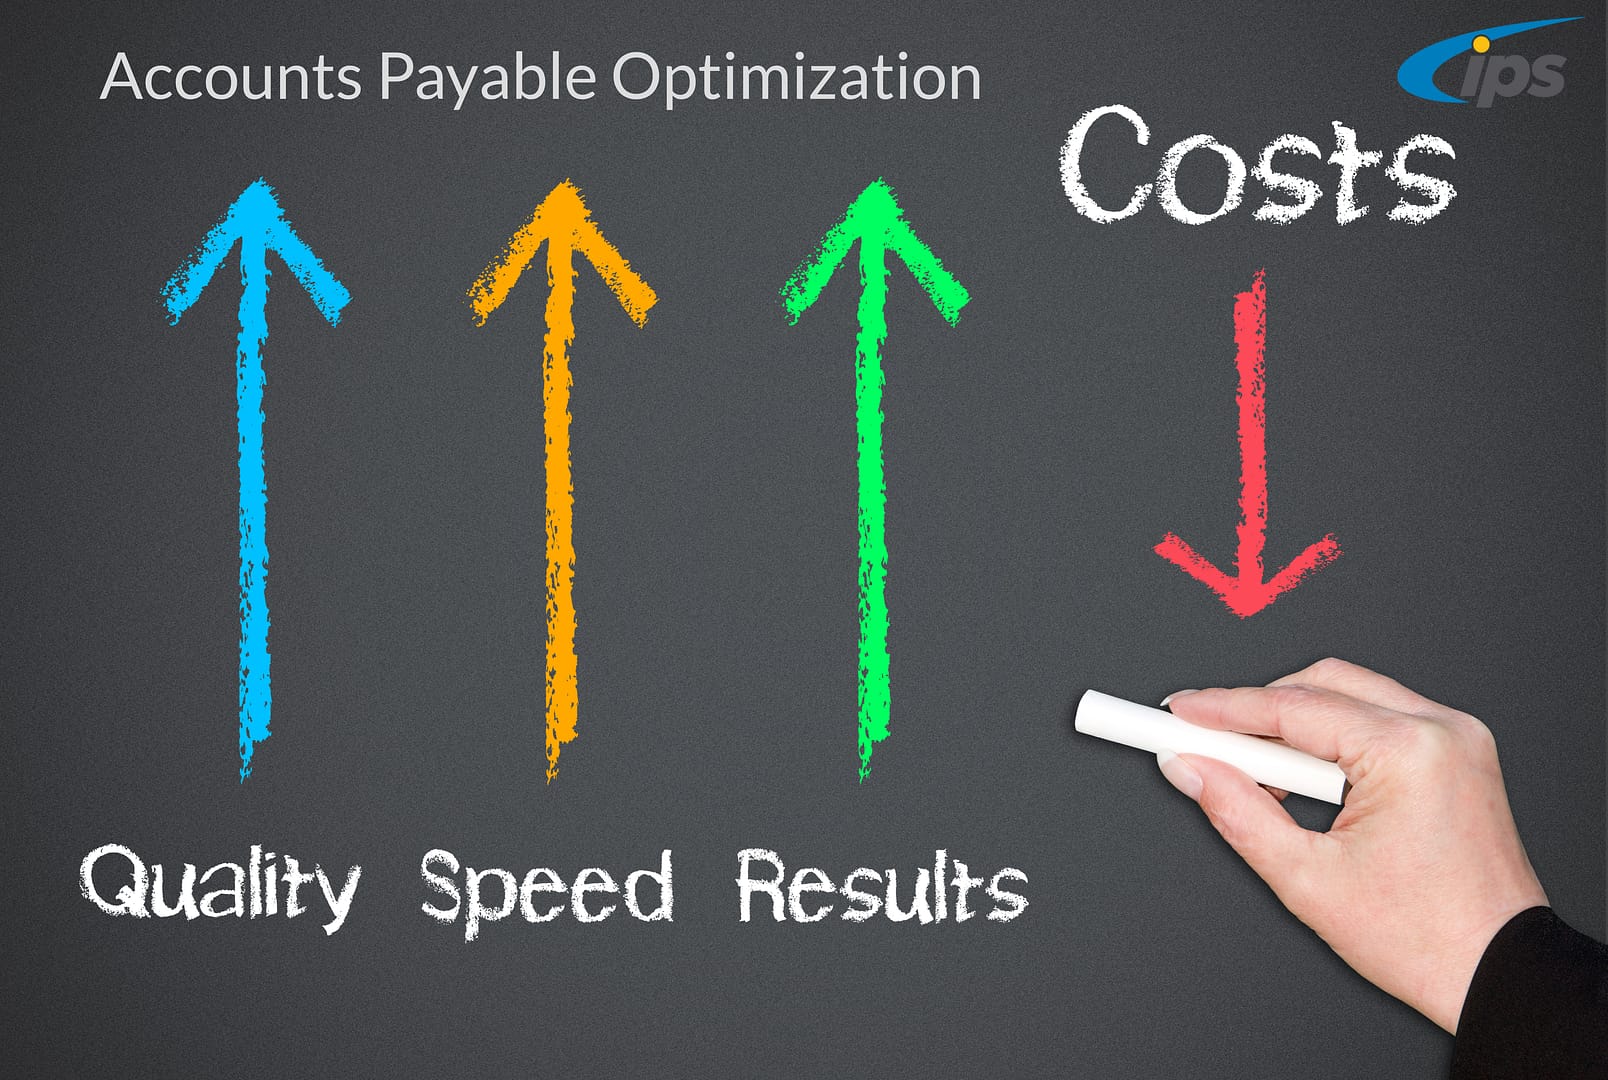 What is Accounts Payable Optimization?